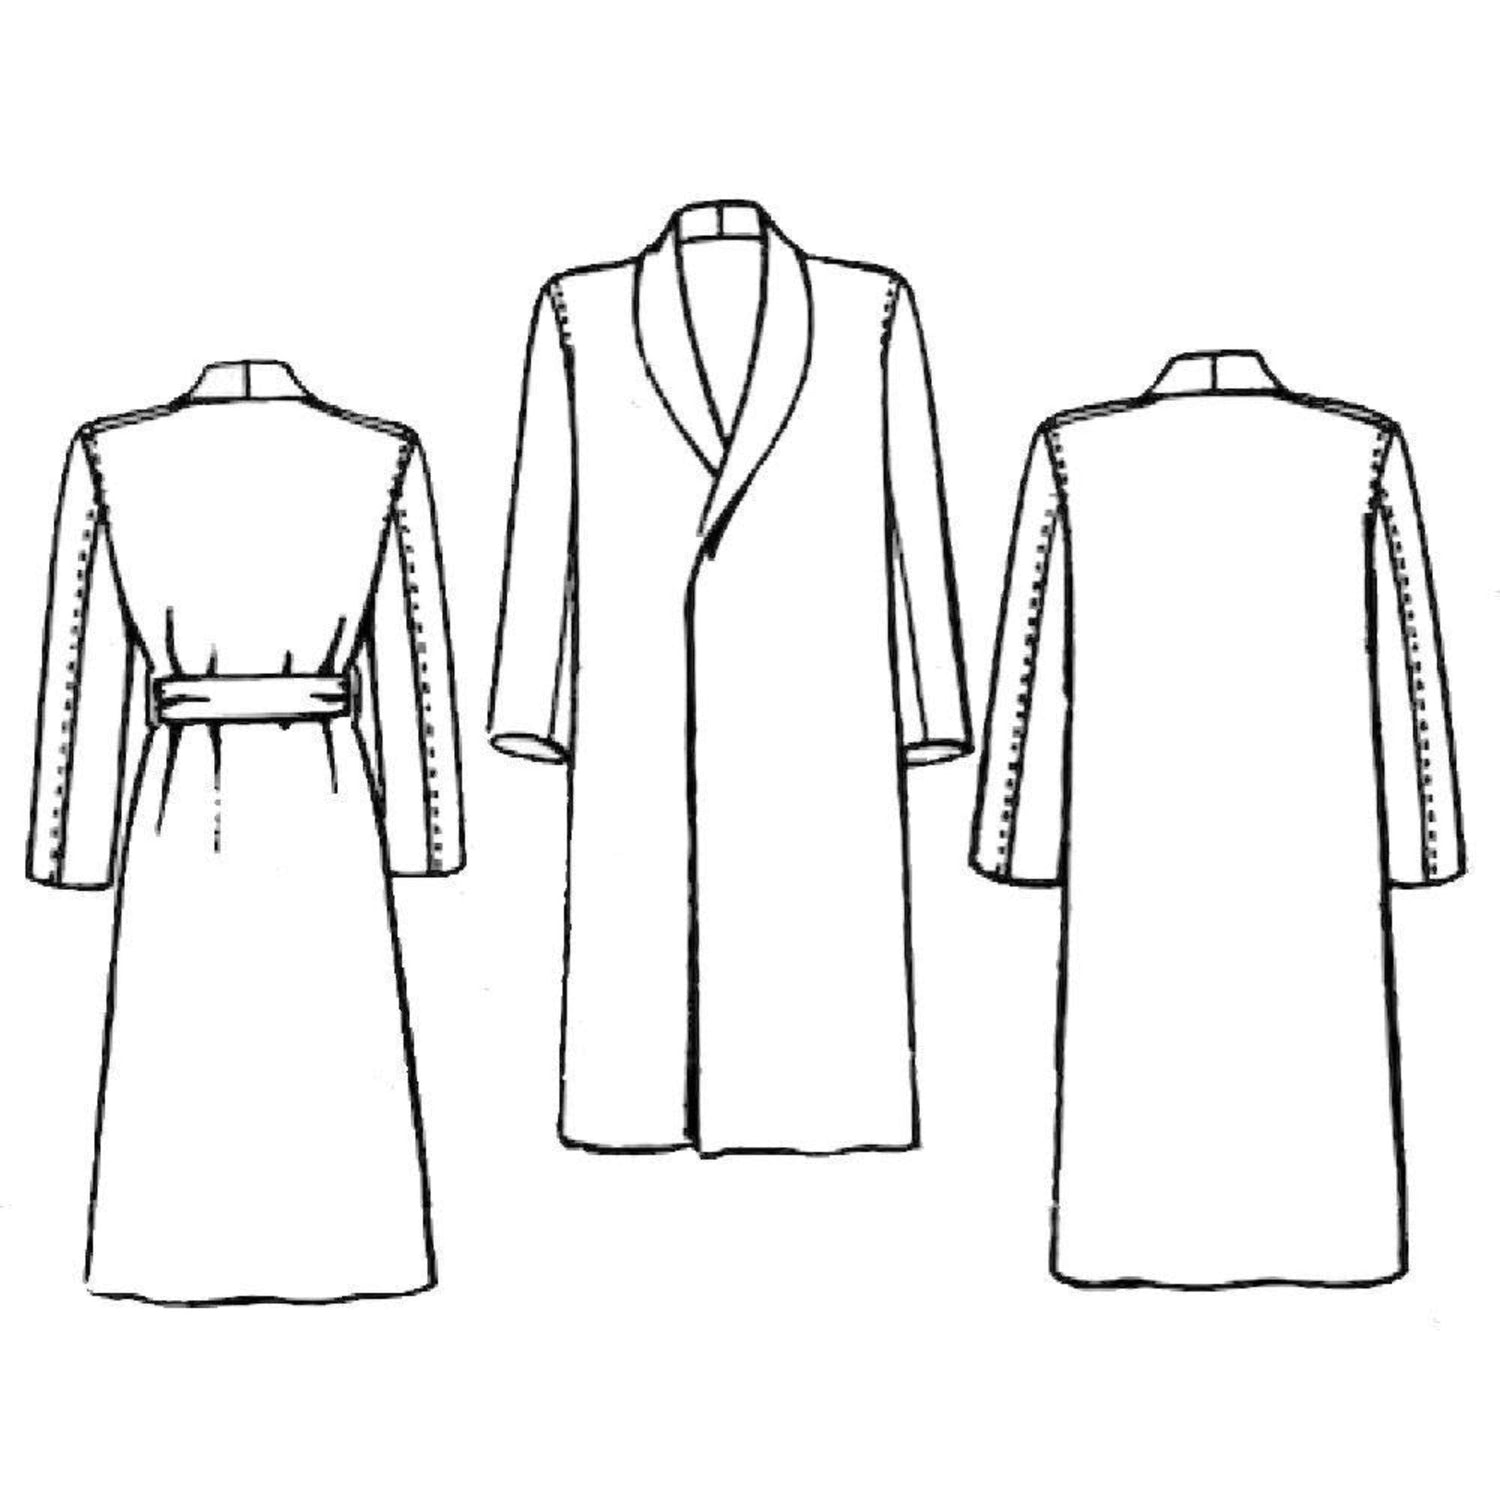 Line drawings of dressing gown